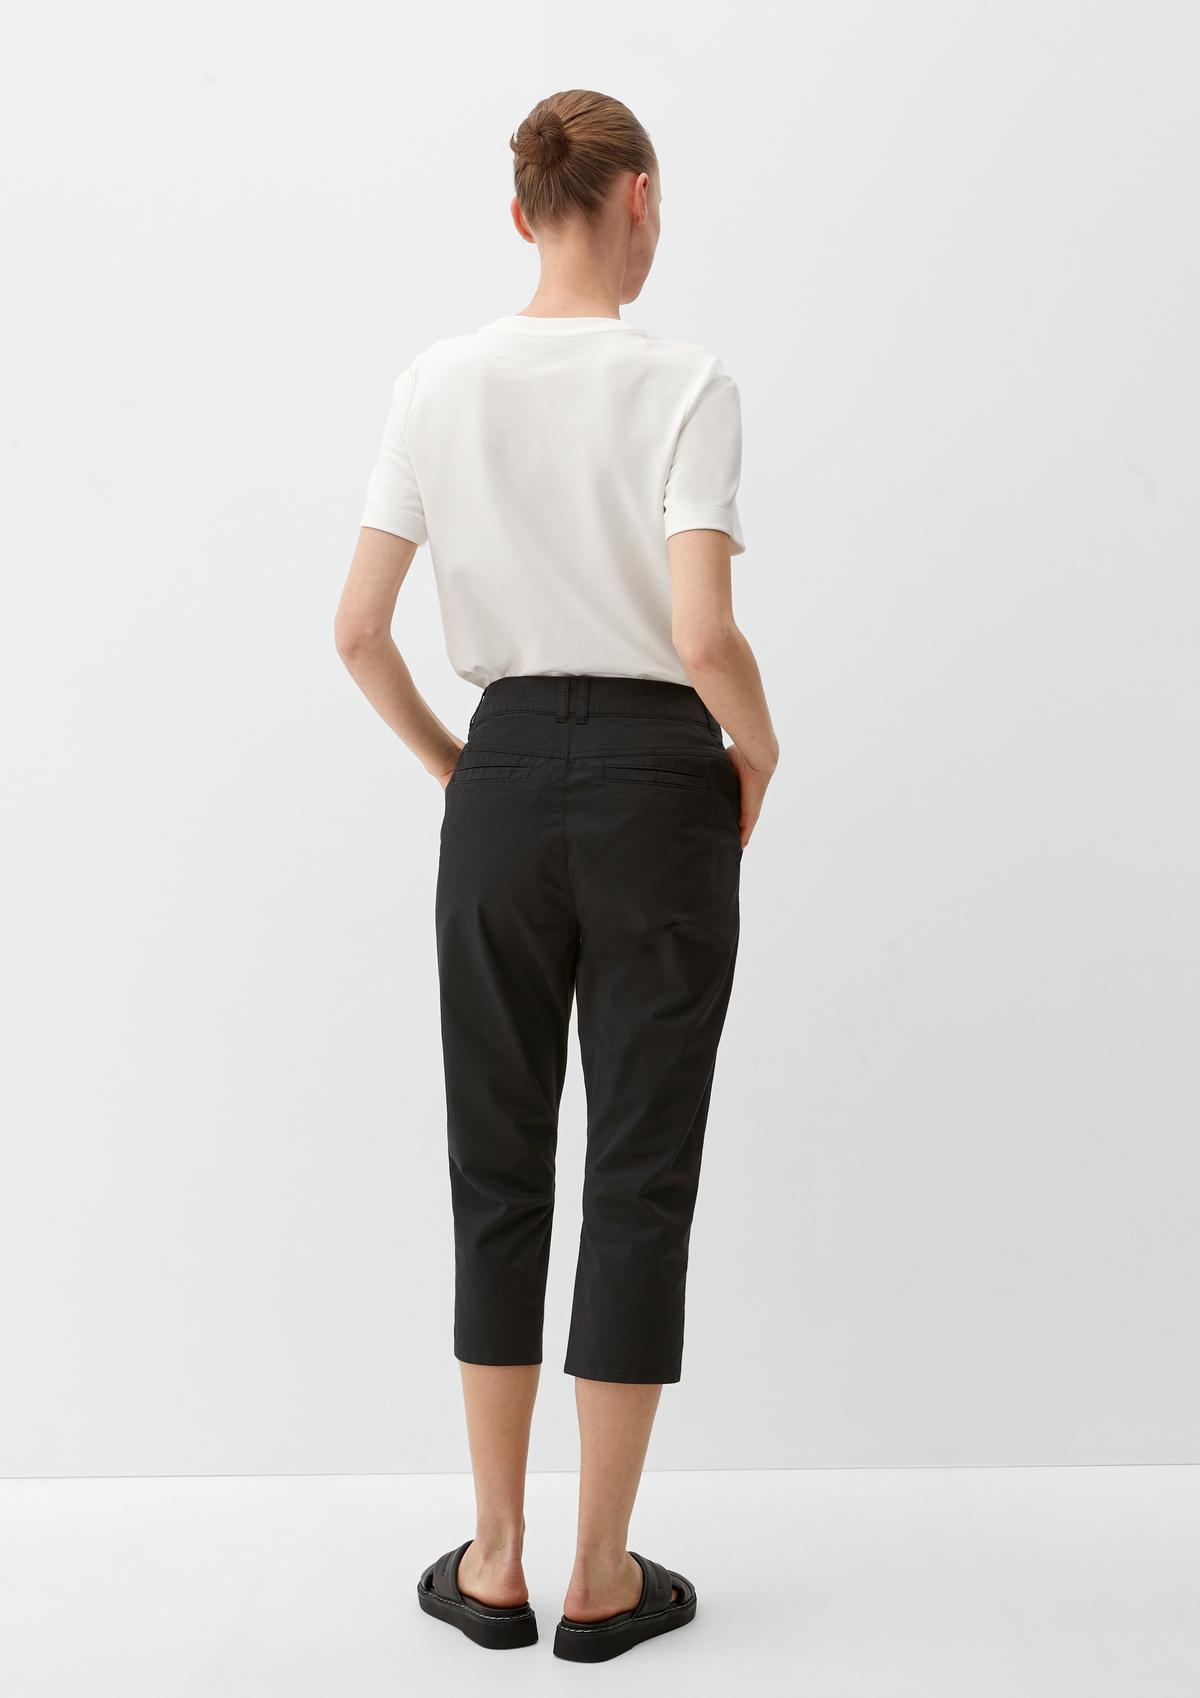 s.Oliver Relaxed fit: capri trousers with double belt loops